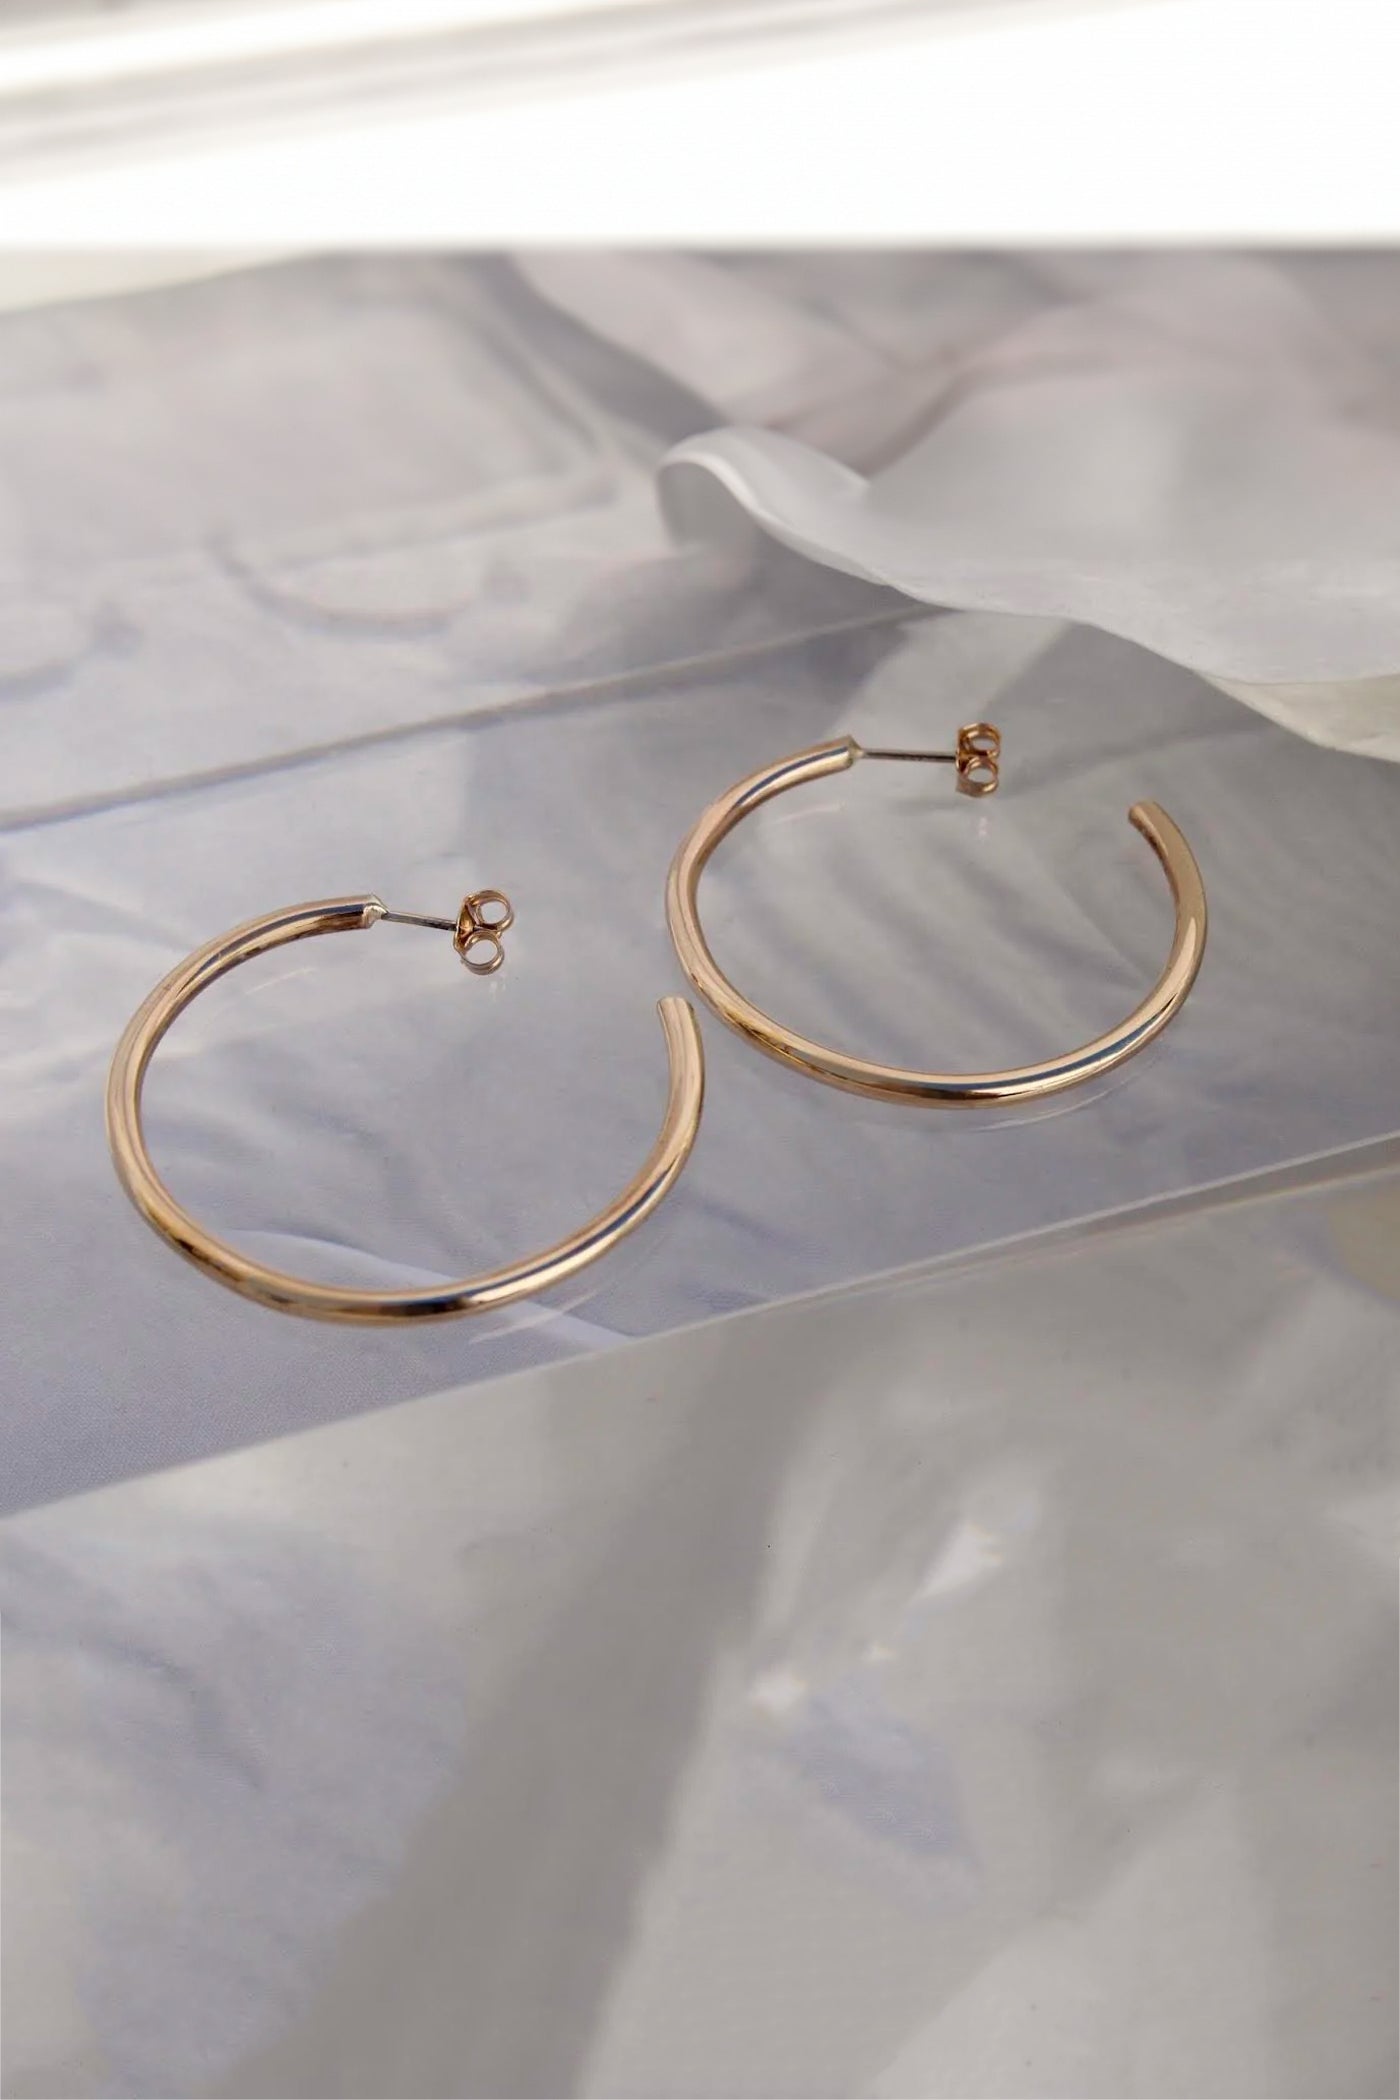 Sadie Jo Jewelry Co. Thin Hoops in Gold Fill